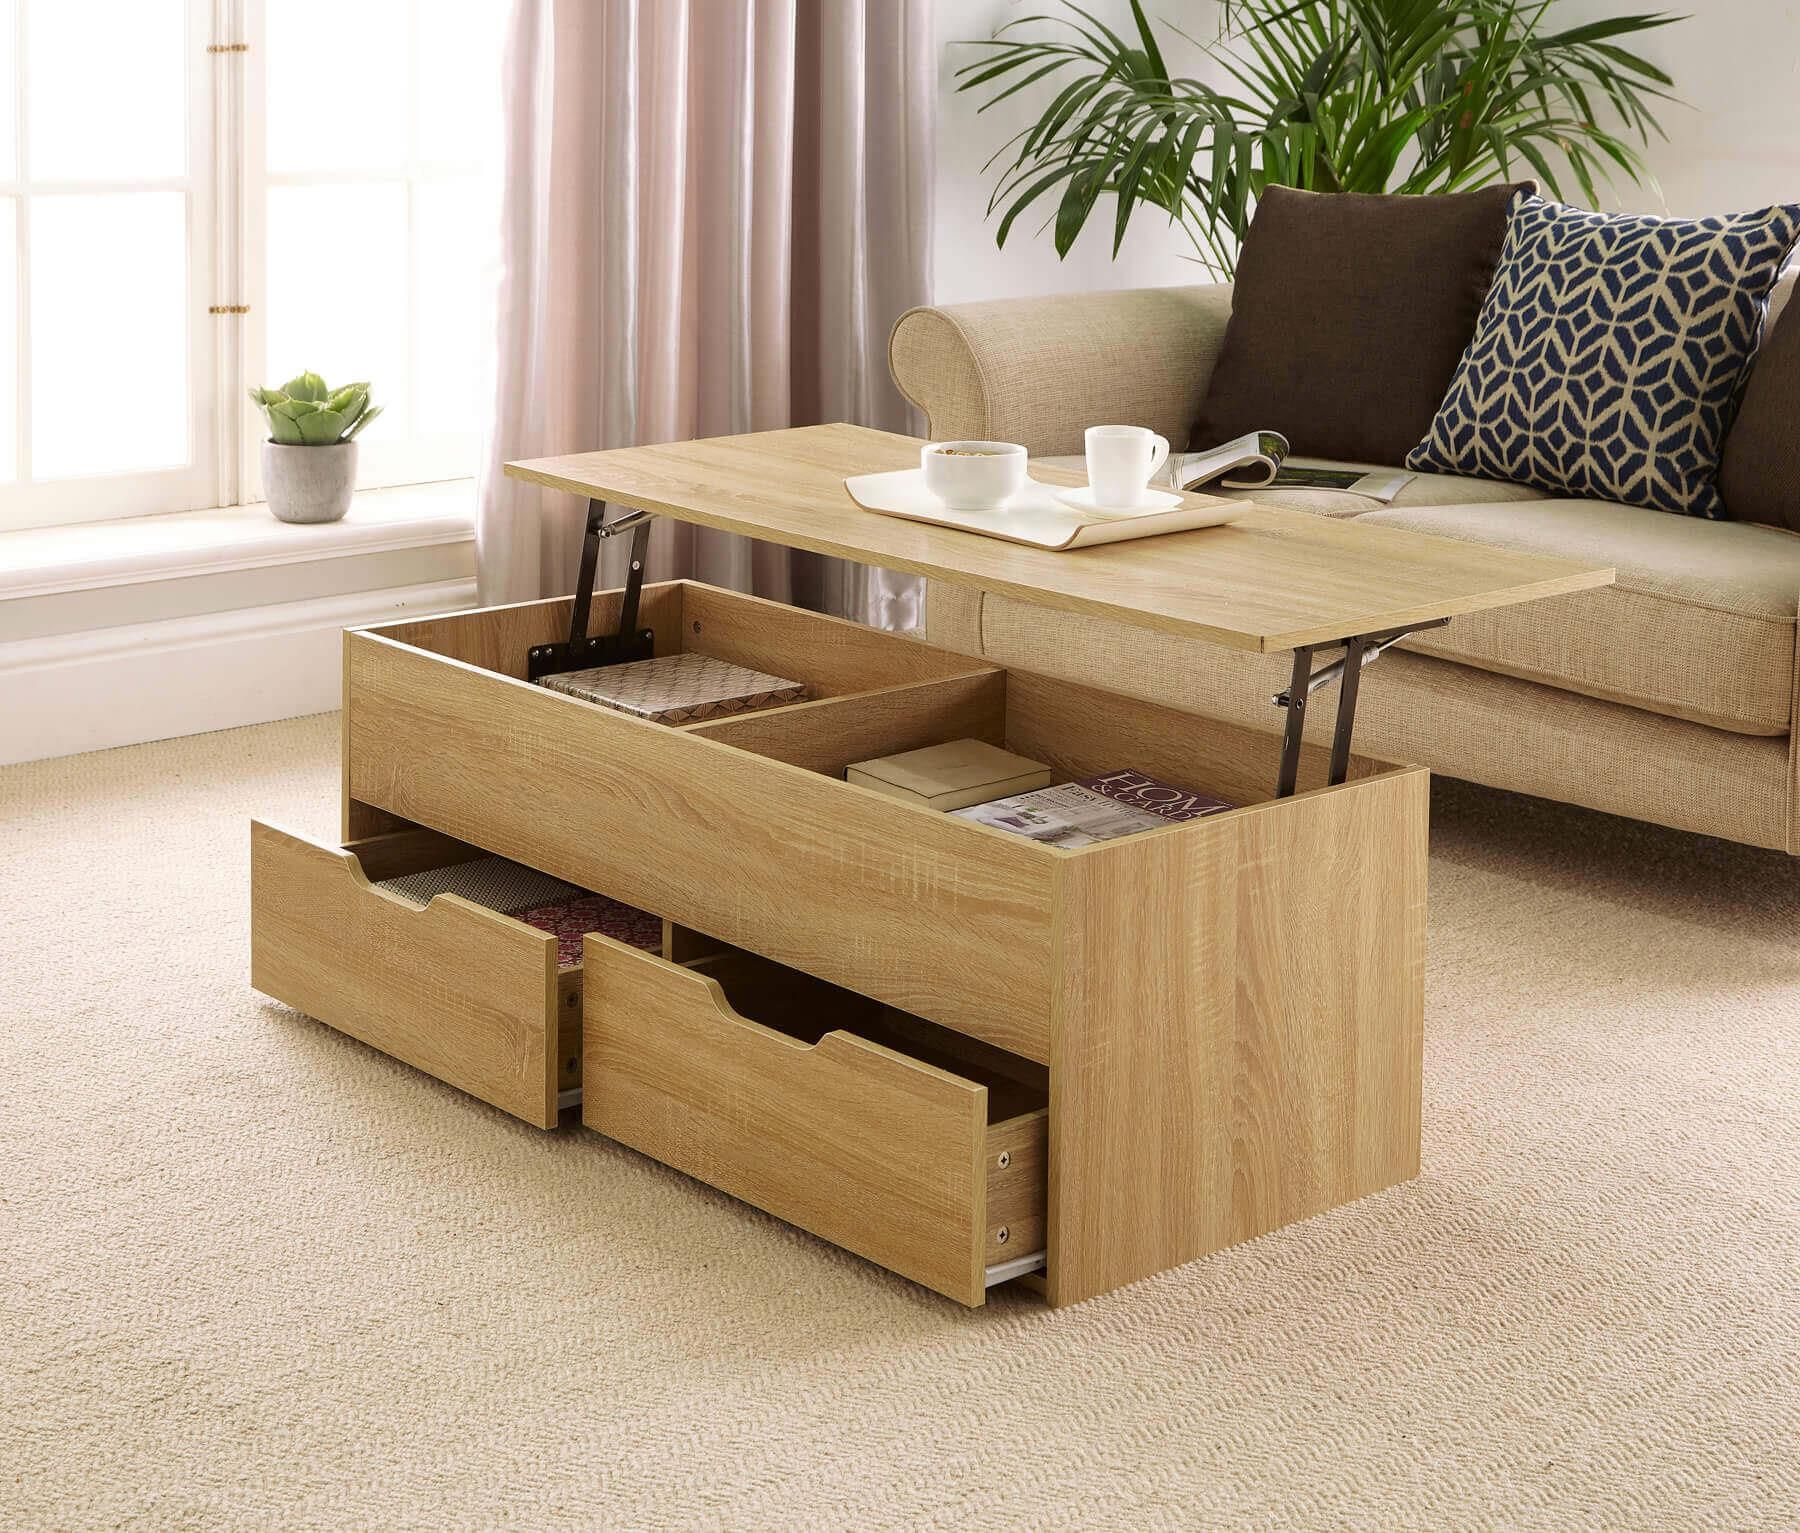 Oak Wooden Coffee Table With Lift Up Top And 2 Large Storage Drawers Inside Lift Top Coffee Tables With Storage Drawers (Gallery 2 of 20)